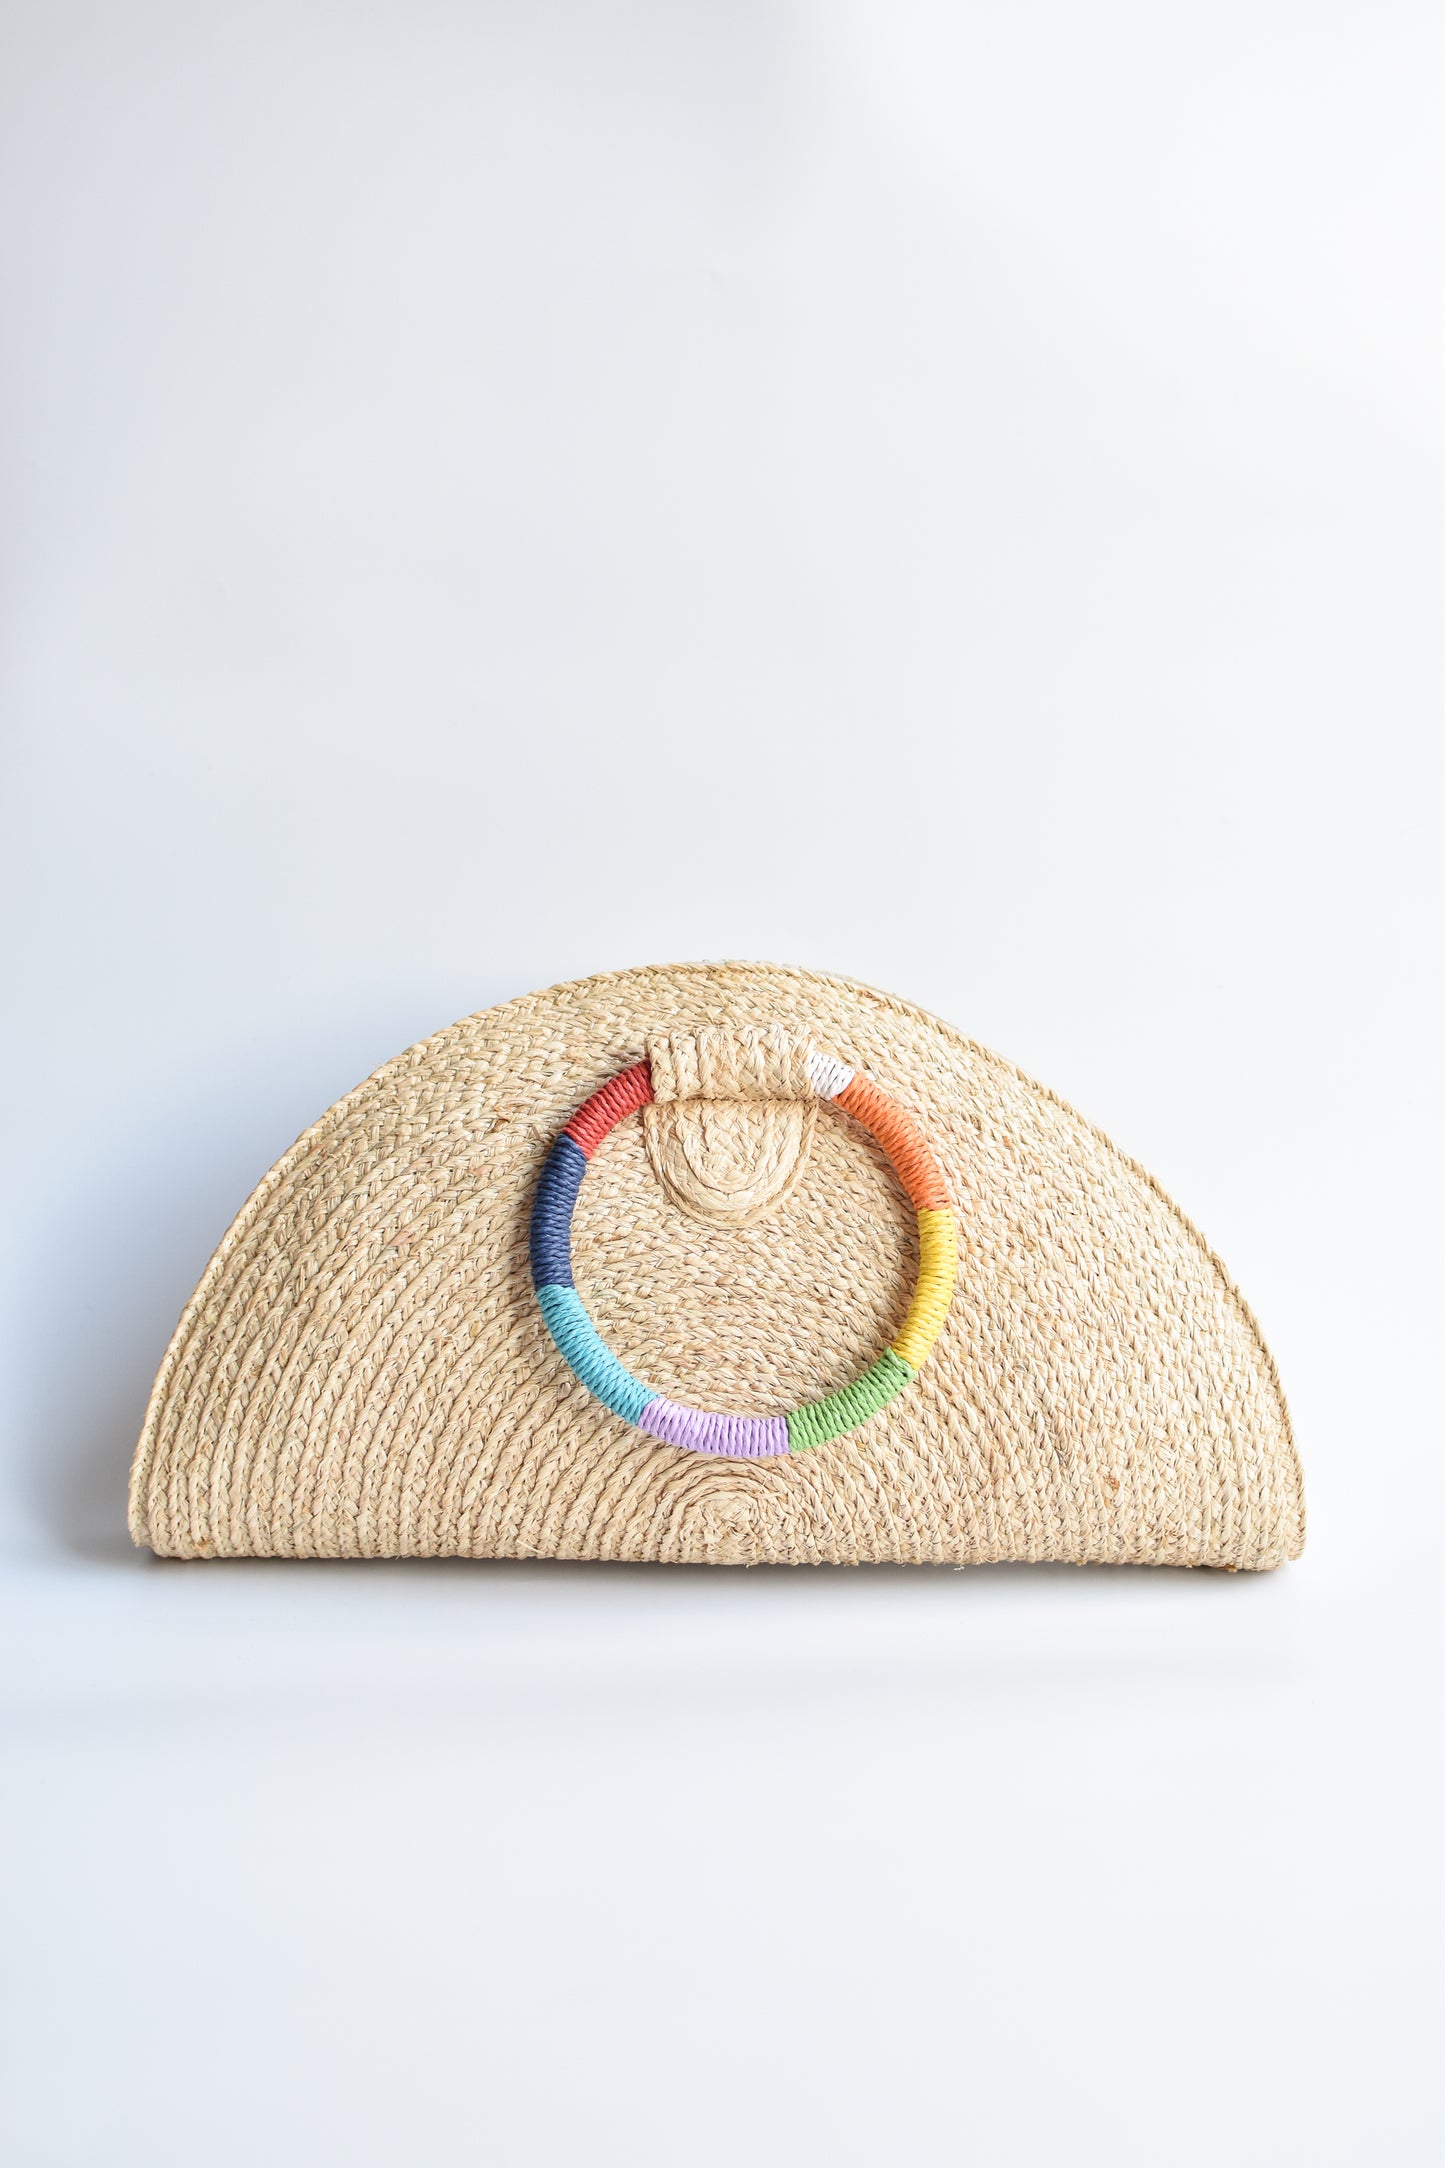 Natural raffia straw half-moon clutch with rainbow colored wrapped circle handle and leather sides.